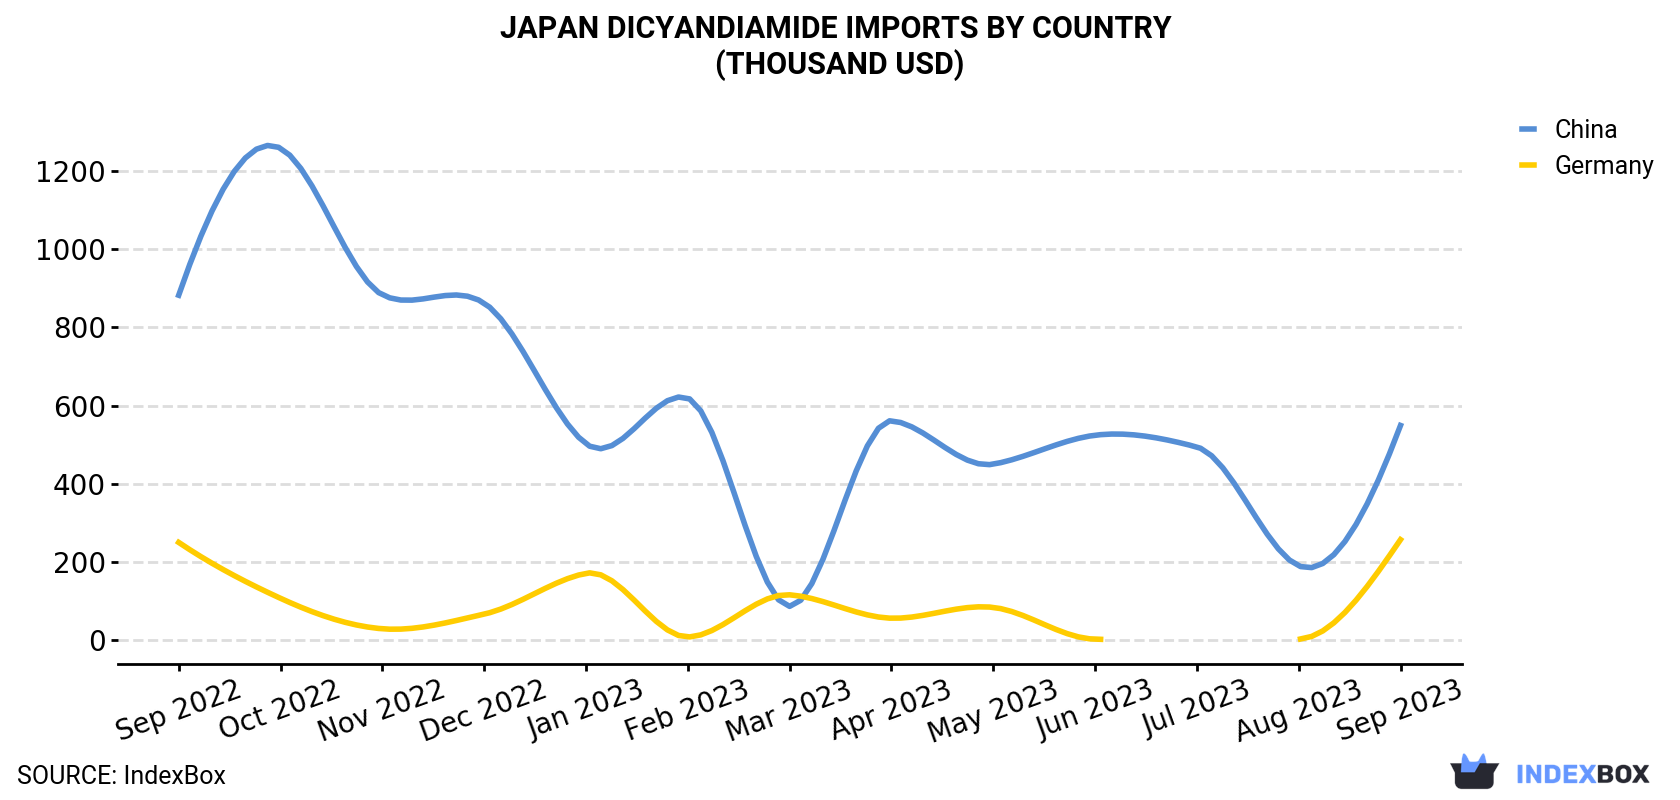 Japan Dicyandiamide Imports By Country (Thousand USD)